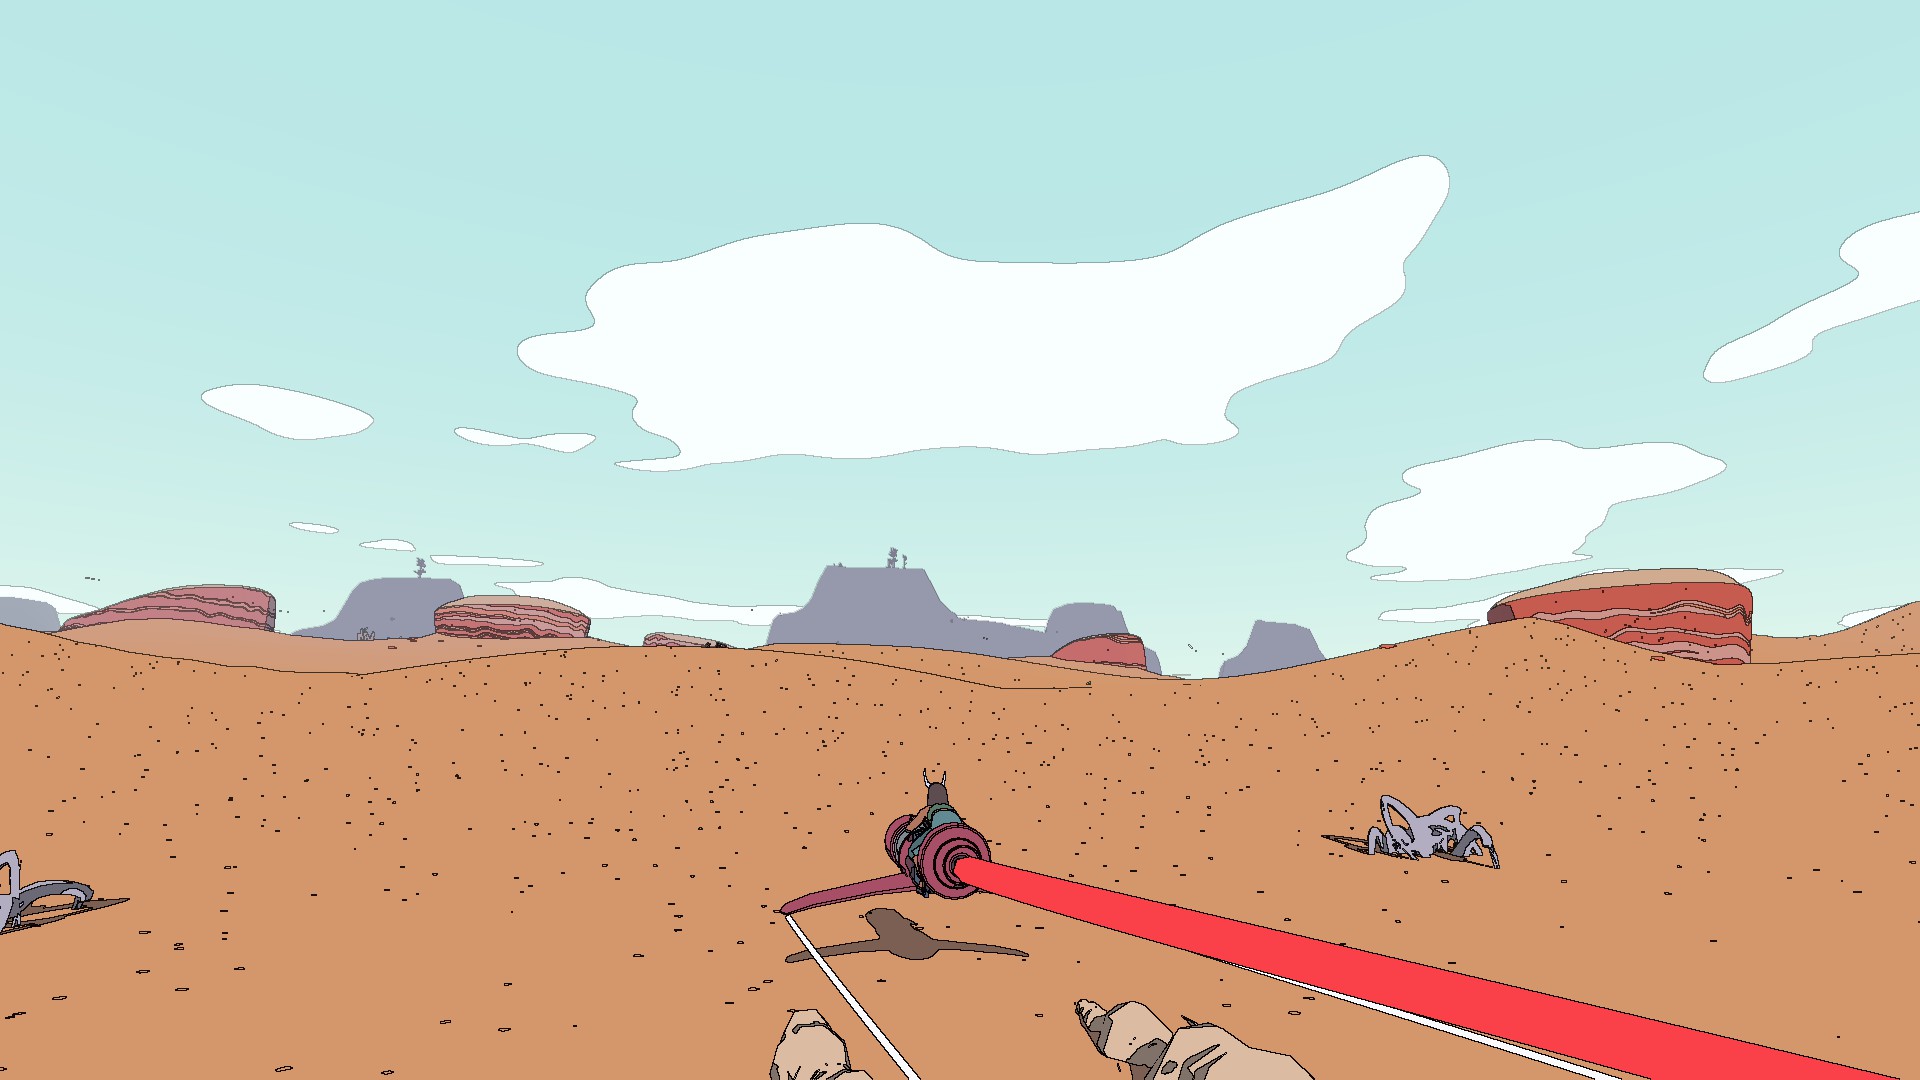 Sable sits atop Simoon in the foreground, the desert expanse surrounding her